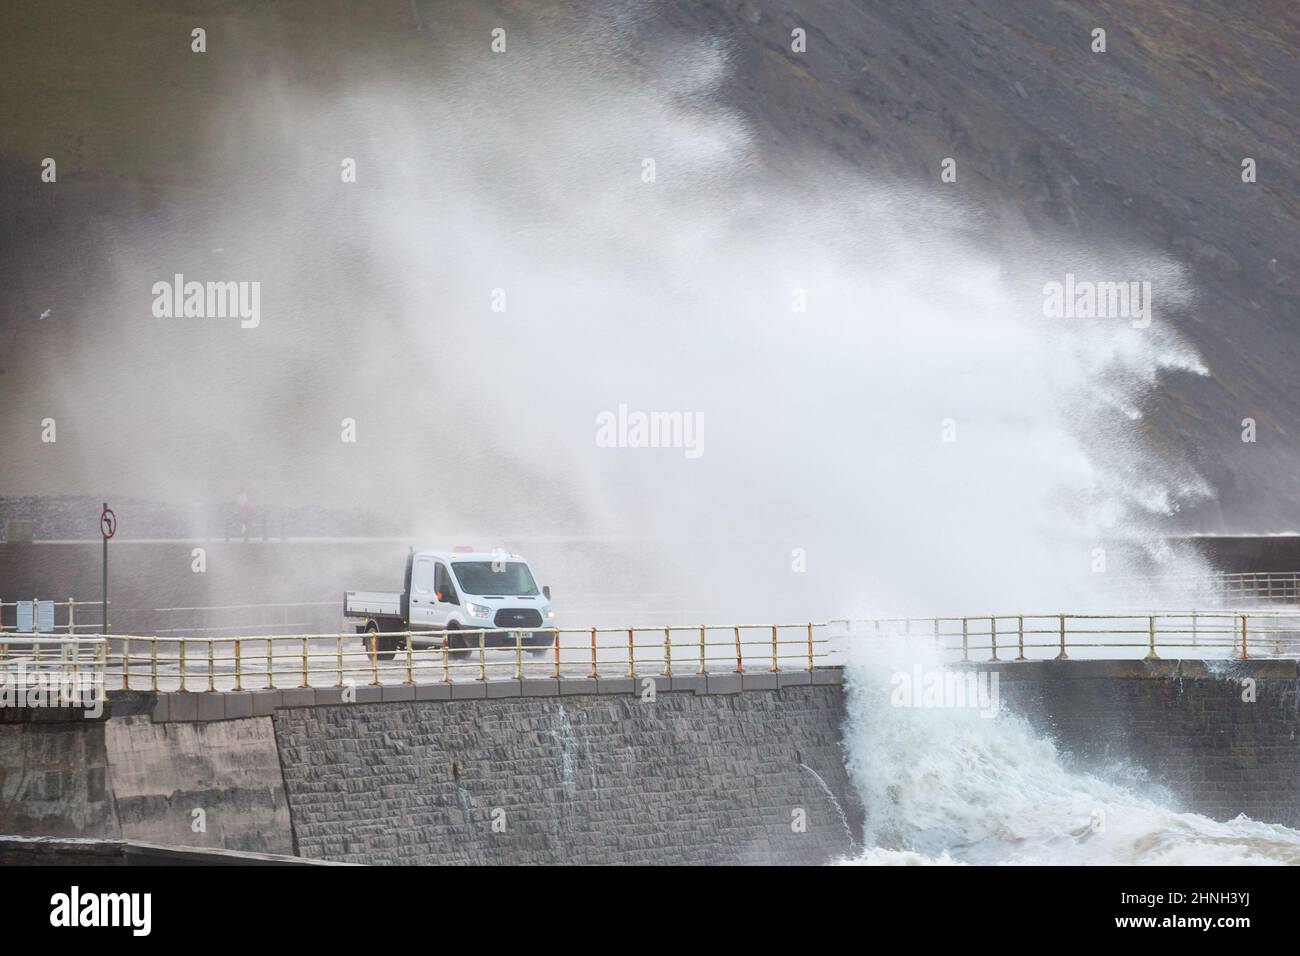 Aberystwyth, Ceredigion, Wales, UK. 17th February 2022 UK Weather: Strong winds continue along the west coast of Aberystwyth as stormy seas crash against the promenade. With further stormy weather expected tomorrow from storm Eunice. © Ian Jones/Alamy Live News Stock Photo